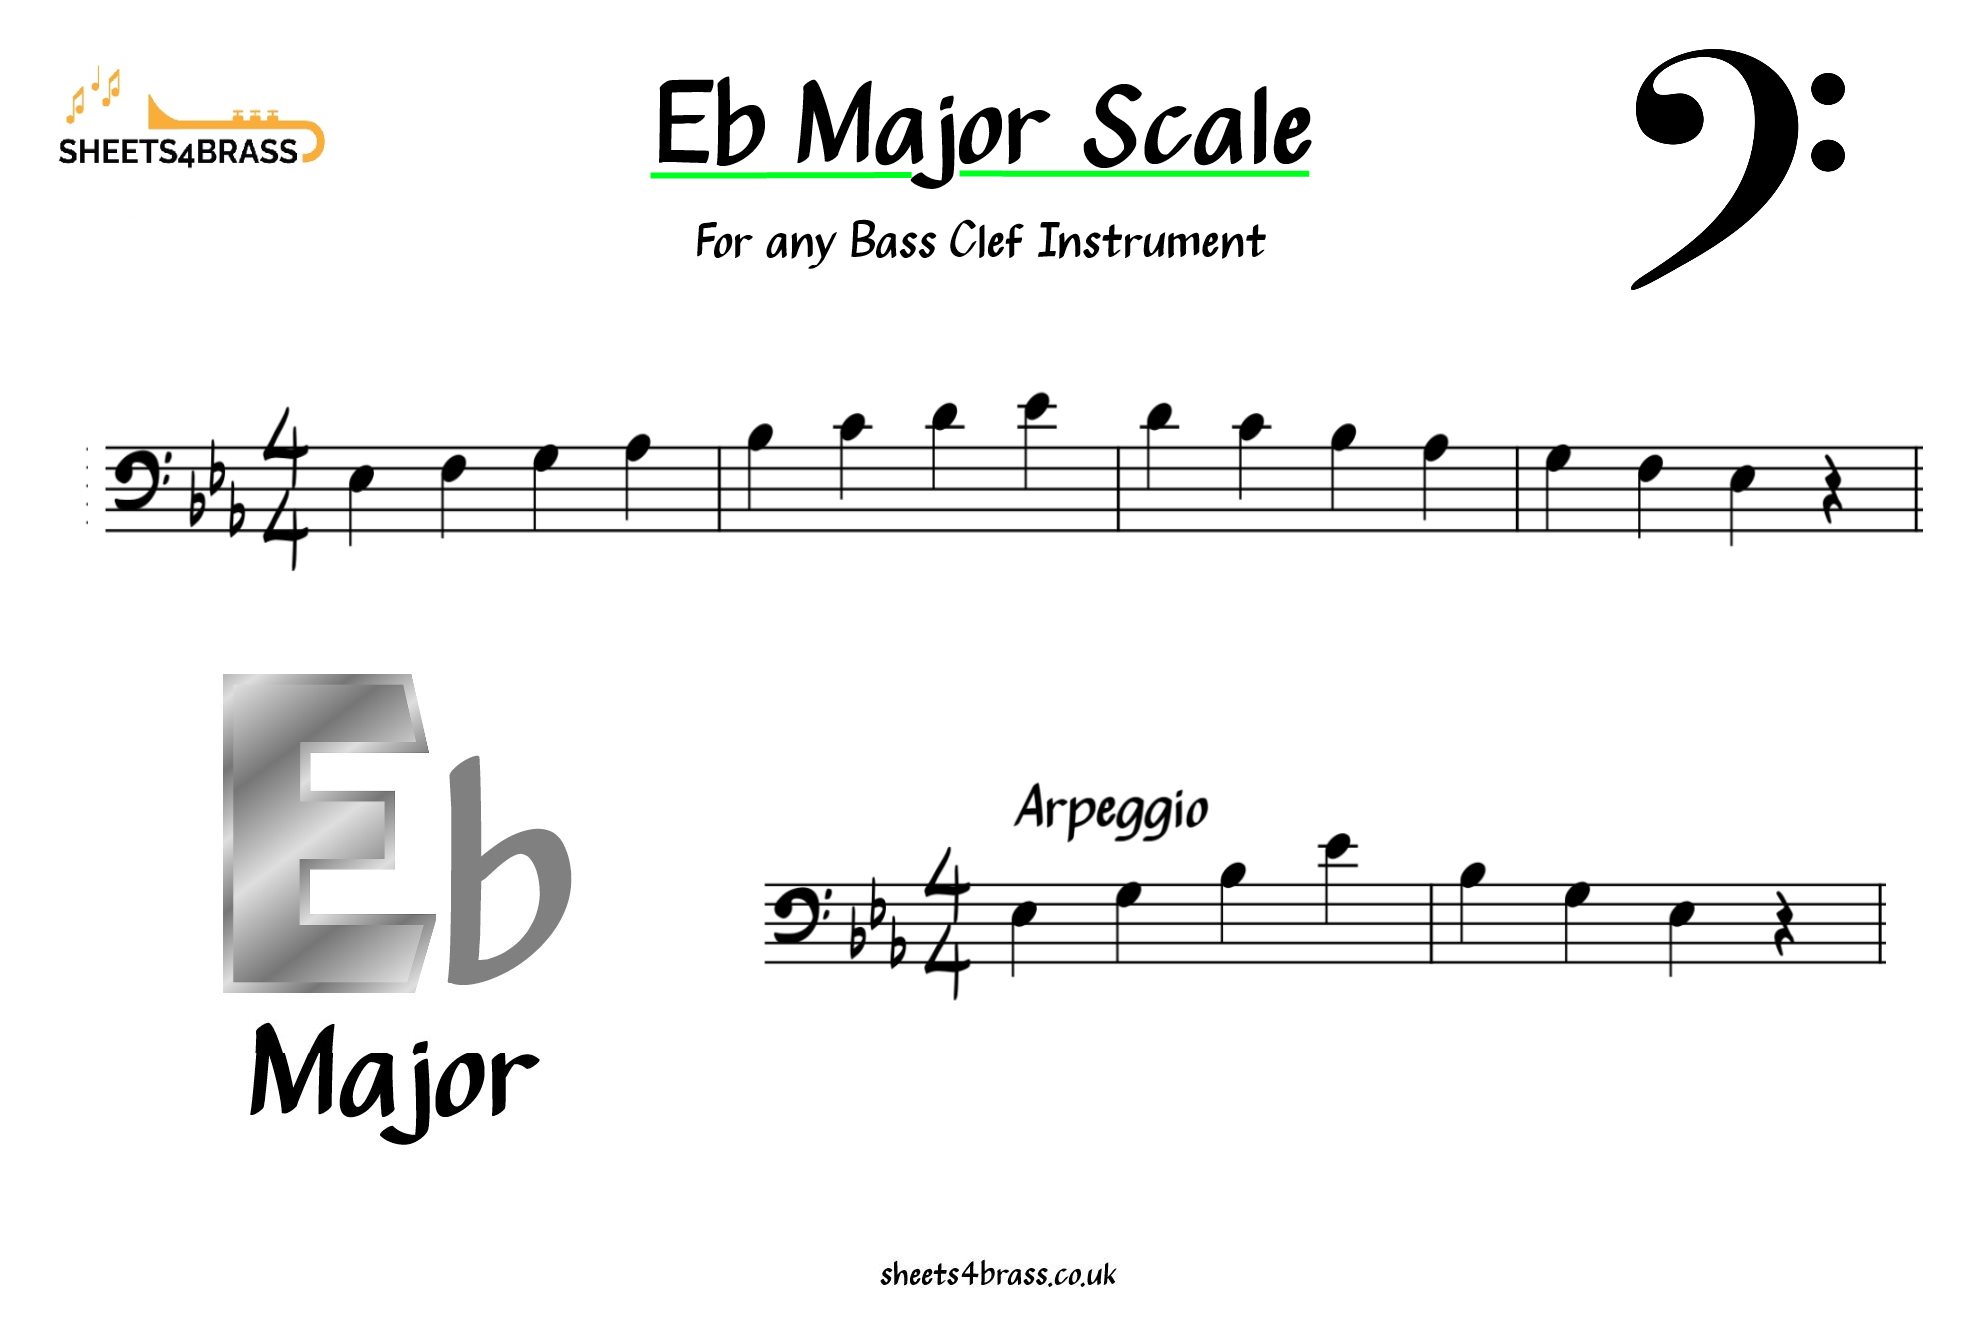 a flat major scale bass clef